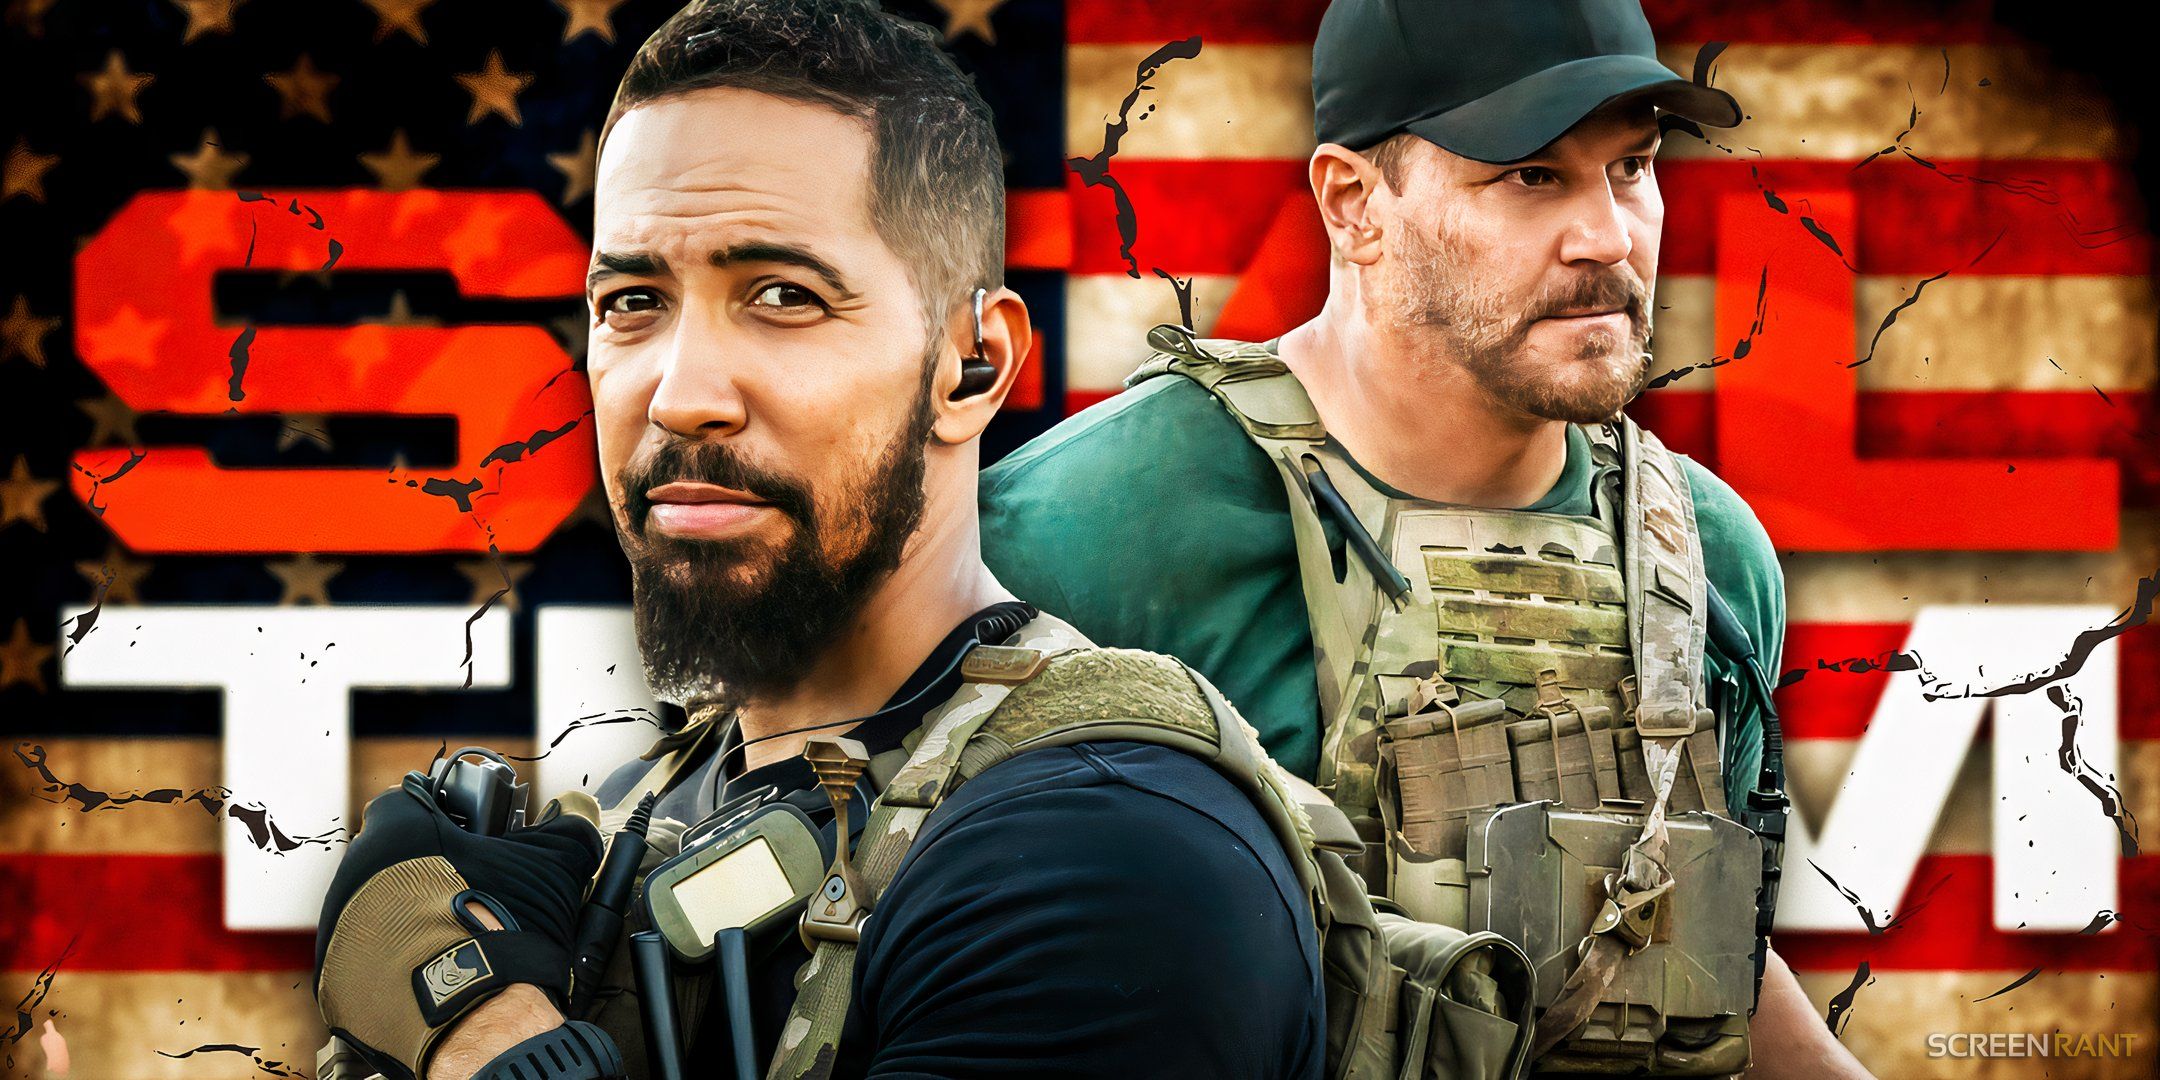 David Boreanaz as Jason Hayes and Neil Brown Jr as Ray Perry in front of SEAL Team show logo